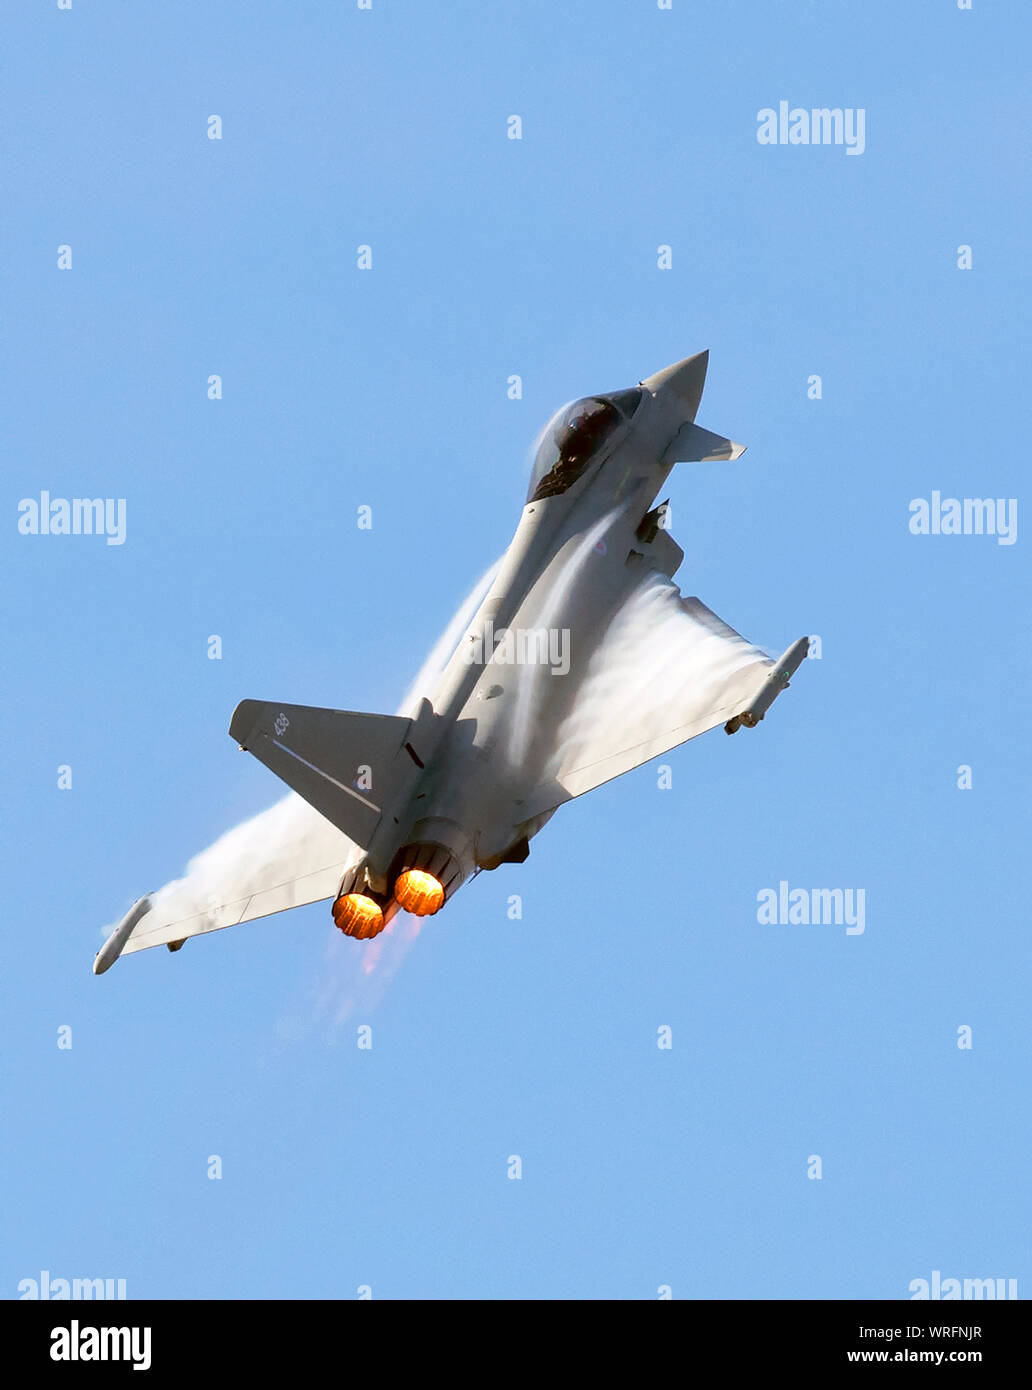 RAF Typhoon showing afterburner and jet stream as it performs at the 2019 Southport Air Show, Merseyside, UK Stock Photo